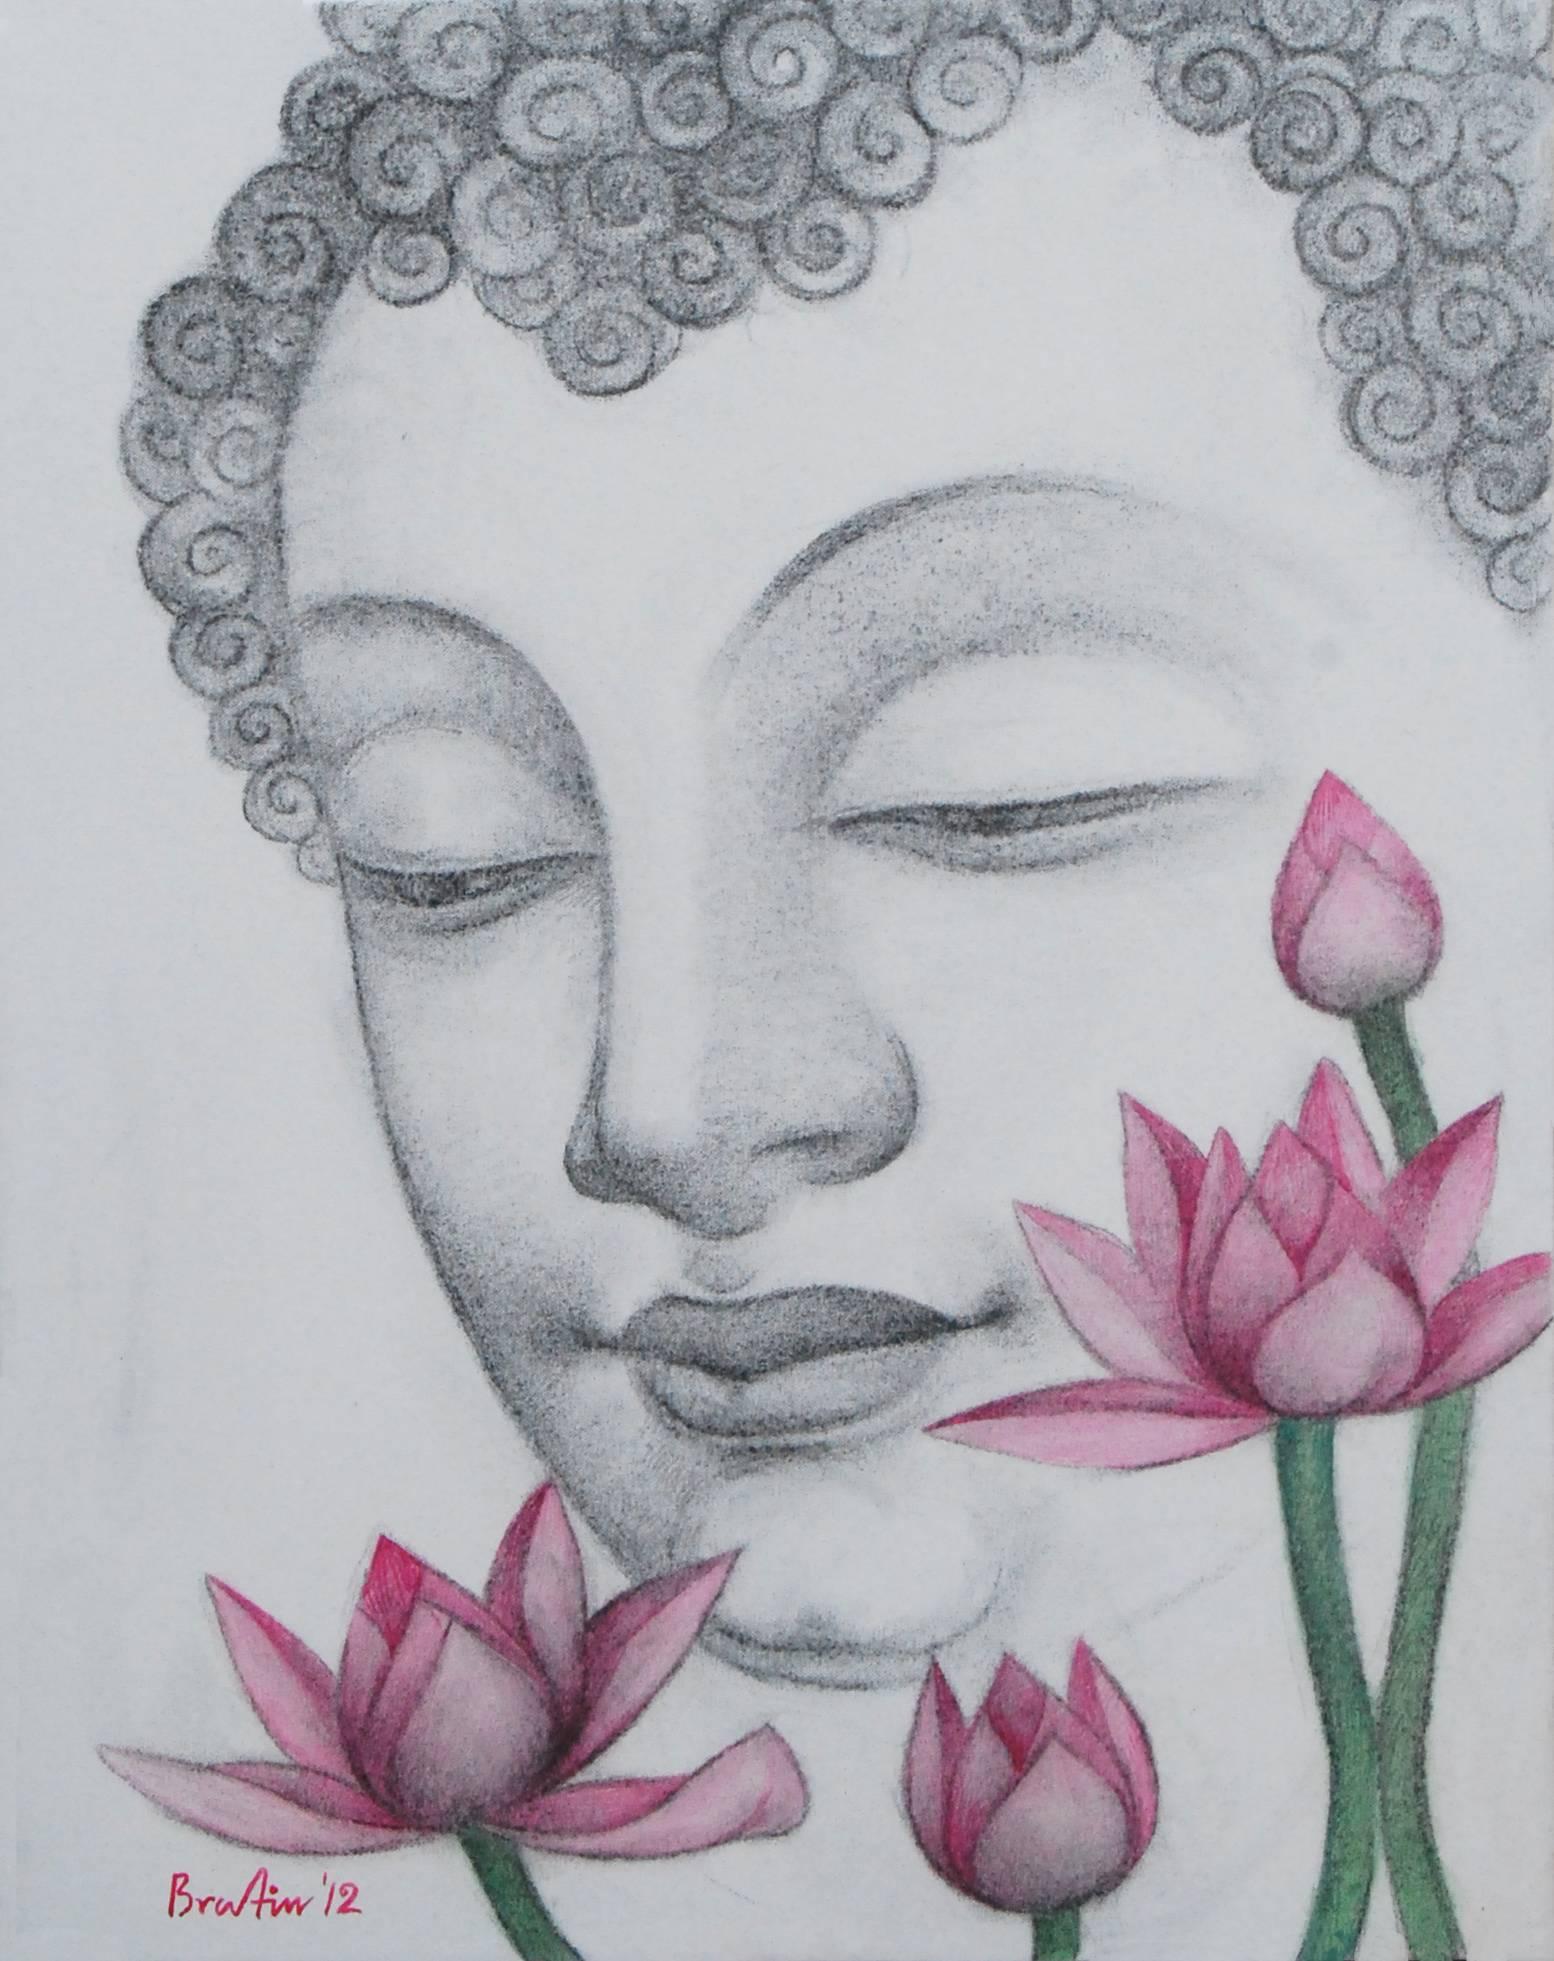 Enlightened, Buddha, Charcoal, Pastel on canvas, Black, Pink, Green "In Stock"